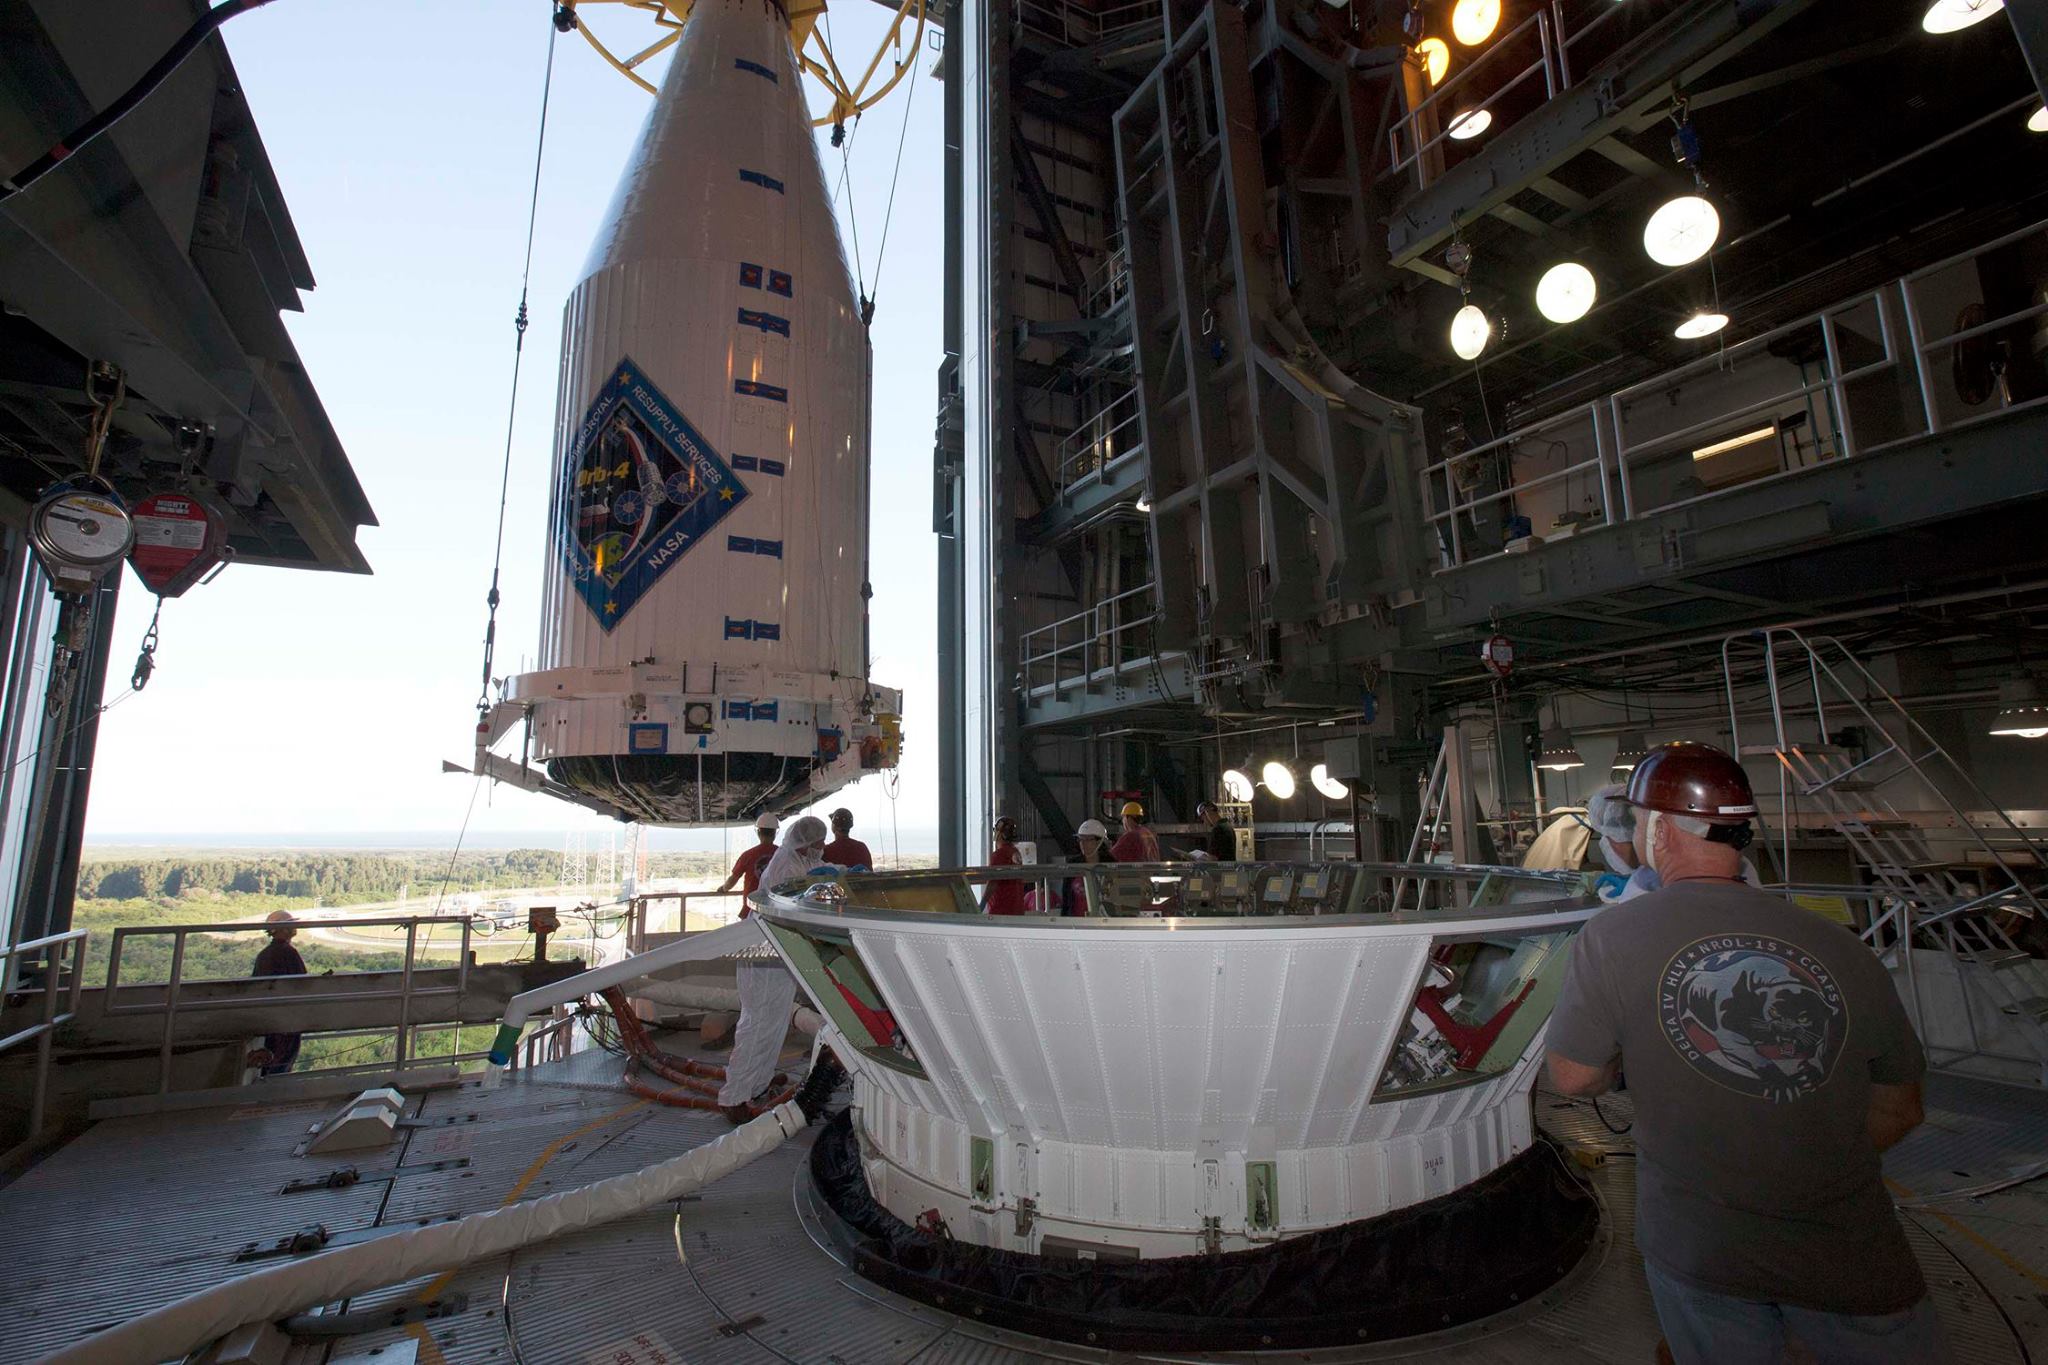 On Friday, November 20, the Orbital ATK's Cygnus "Deke Slayton II" spacecraft for the OA-4 International Space Station cargo resupply mission was mated to its Atlas V rocket. Launch of the OA-4 mission is scheduled for December 3, 2015 from Cape Canaveral Air Force Station Space Launch Complex-41. Photo Credit: NASA / Dmitri Gerondidakis